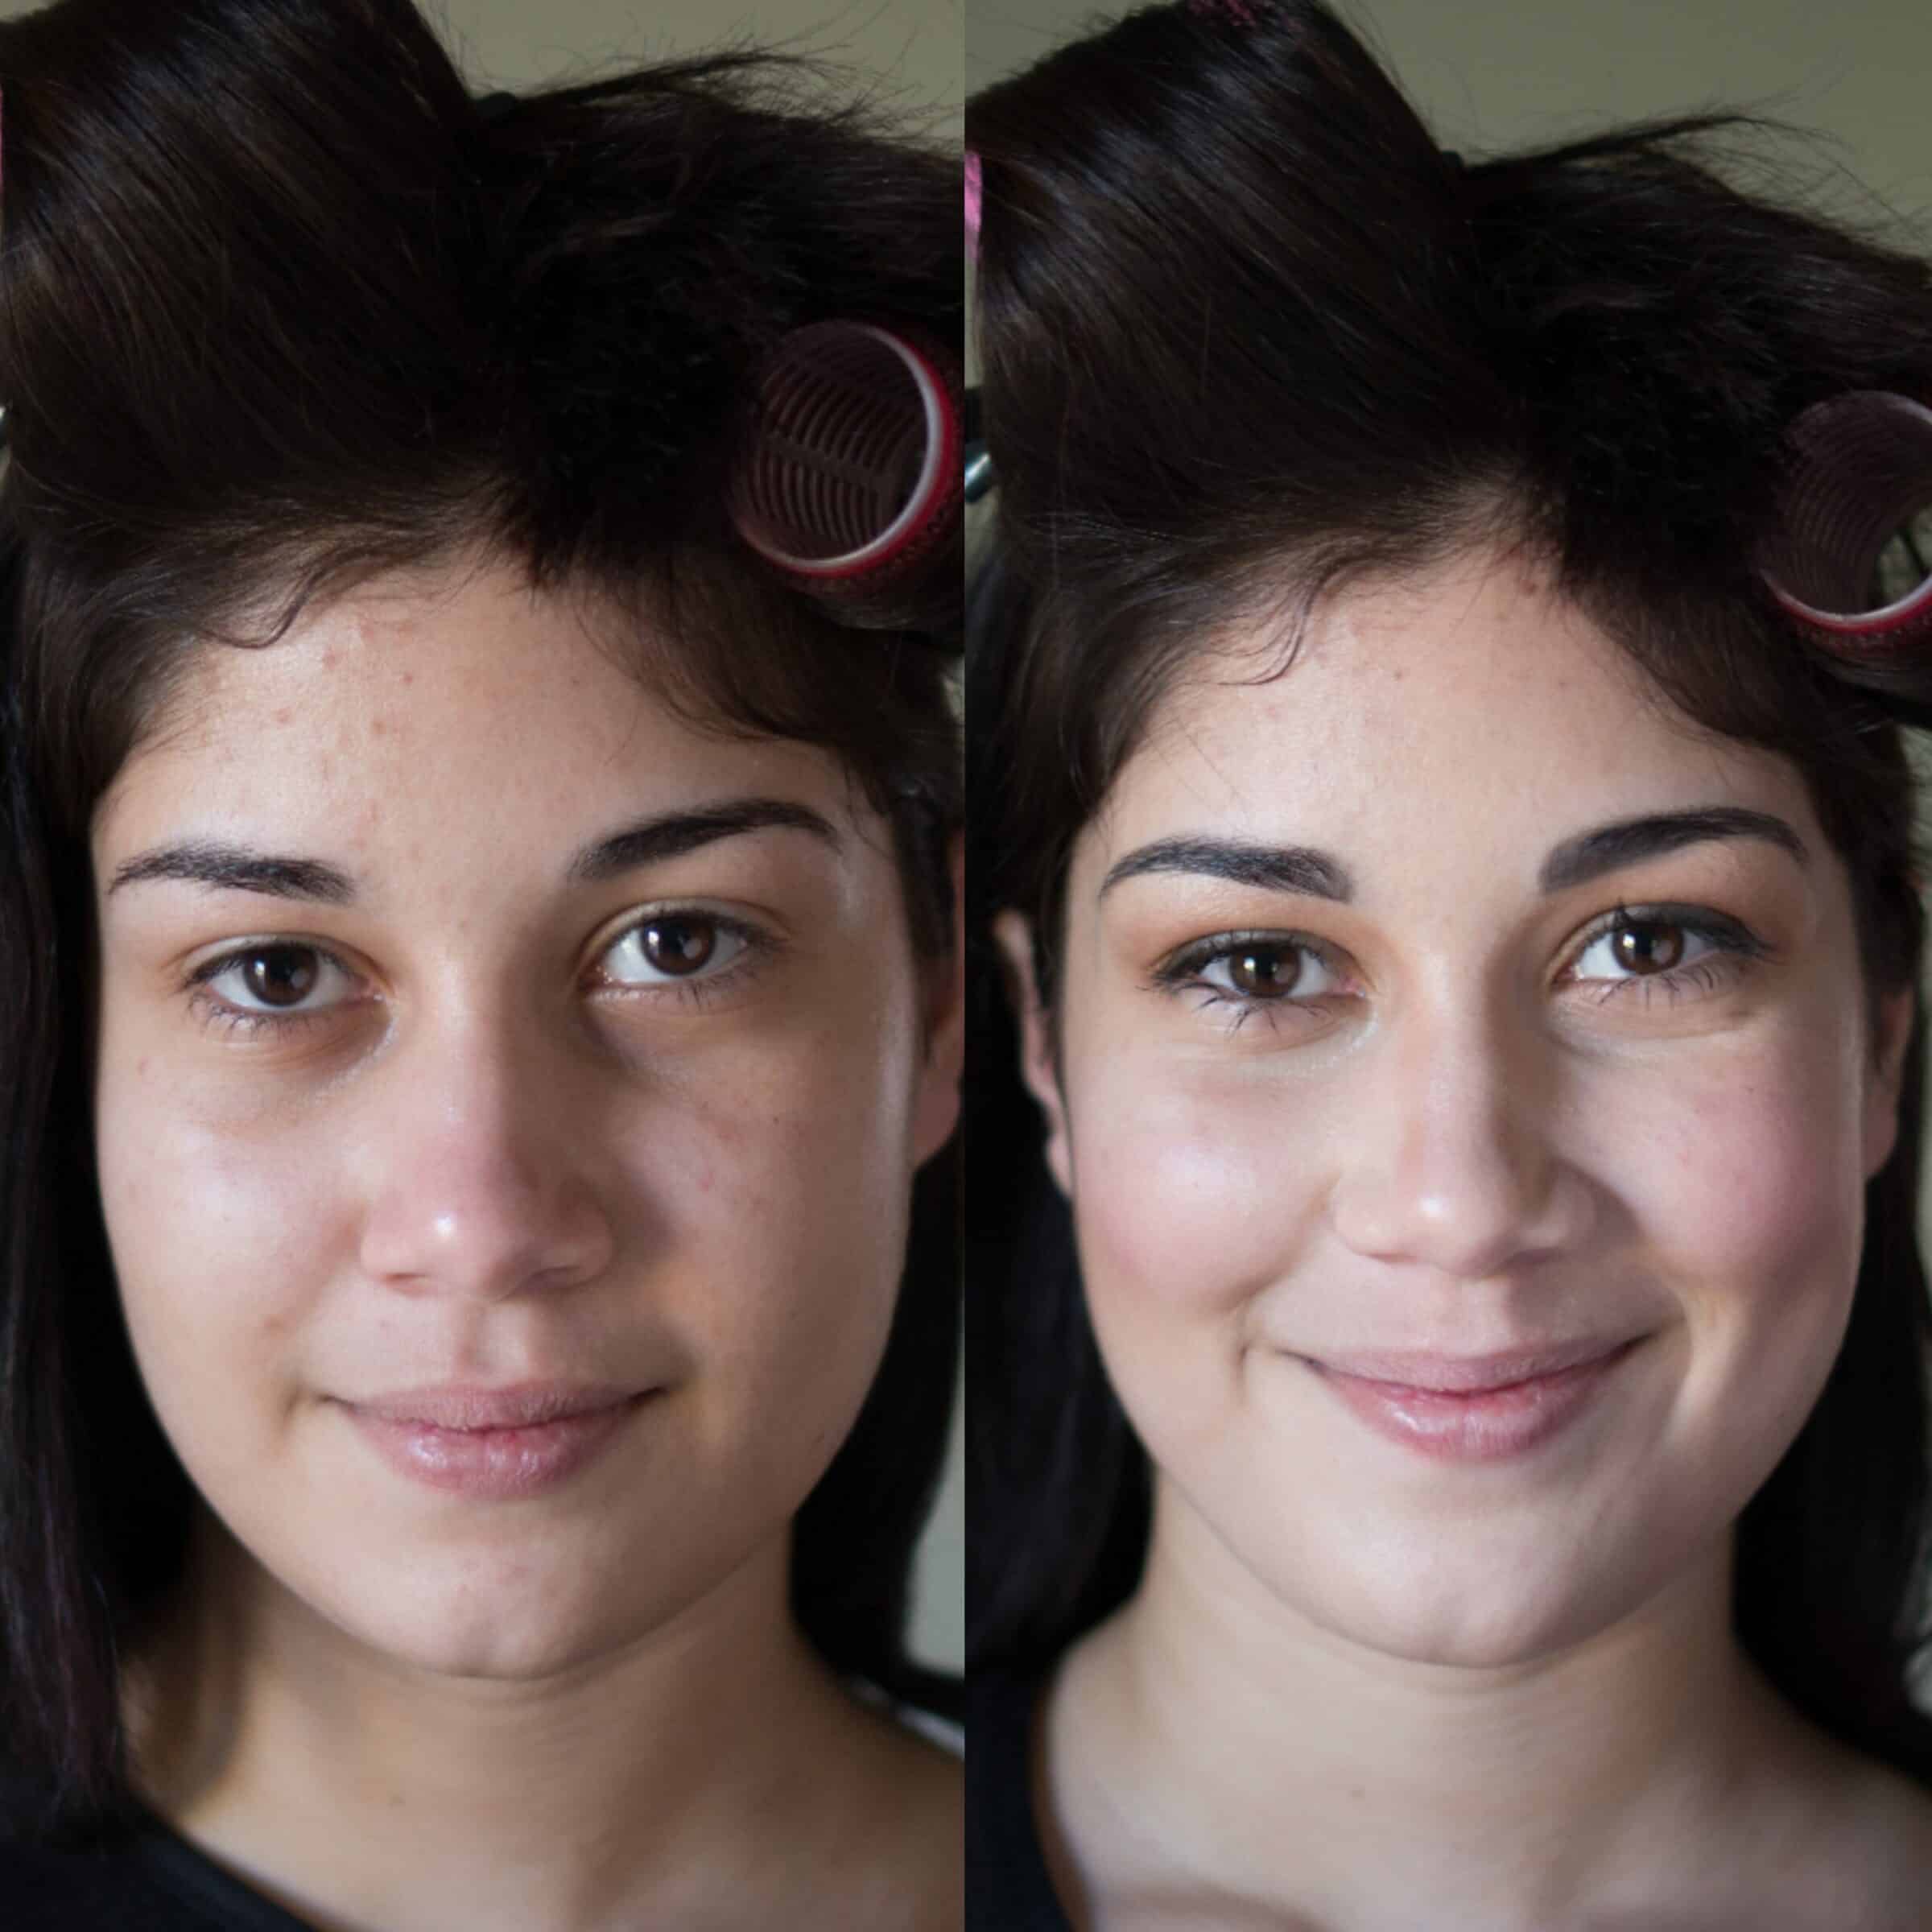 Before and After college ball princess look with Maskcara Beauty Girl at www.maskcarabeautygirl.com